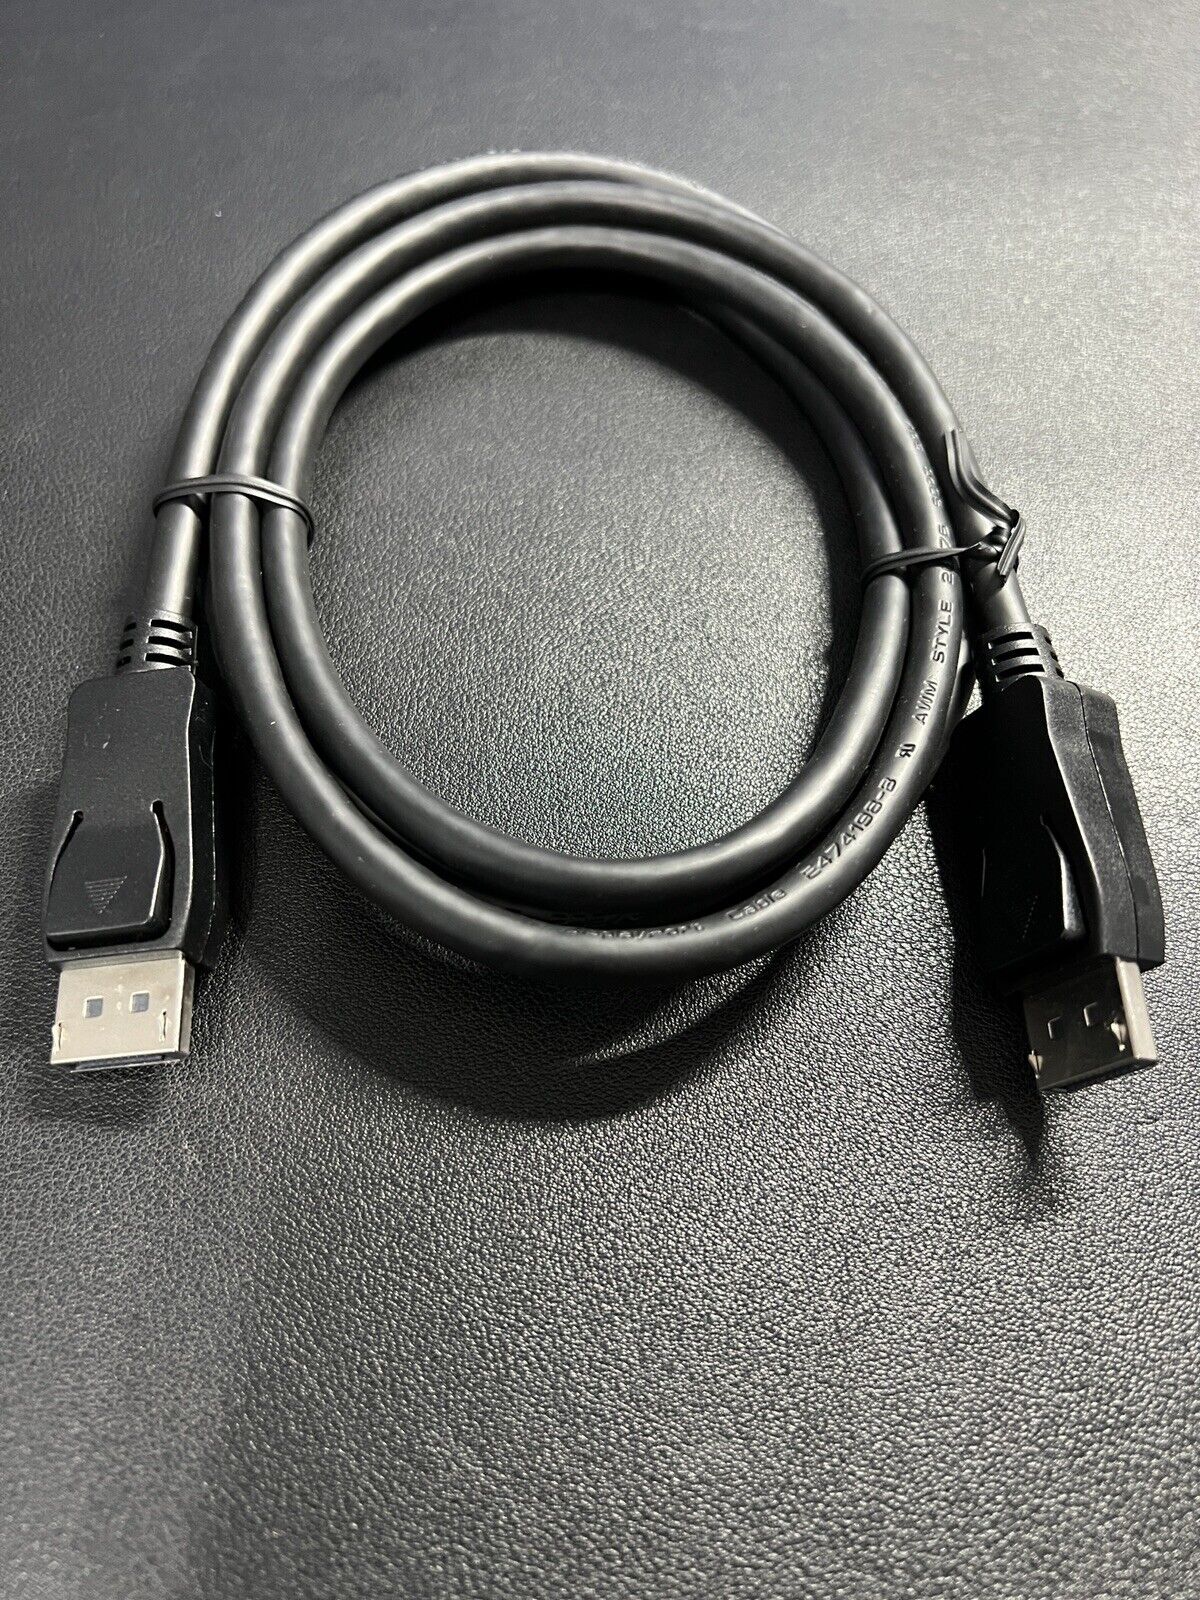 Displayport to Display Port Cable, 6 Foot Cord, Male to Male, with Latches